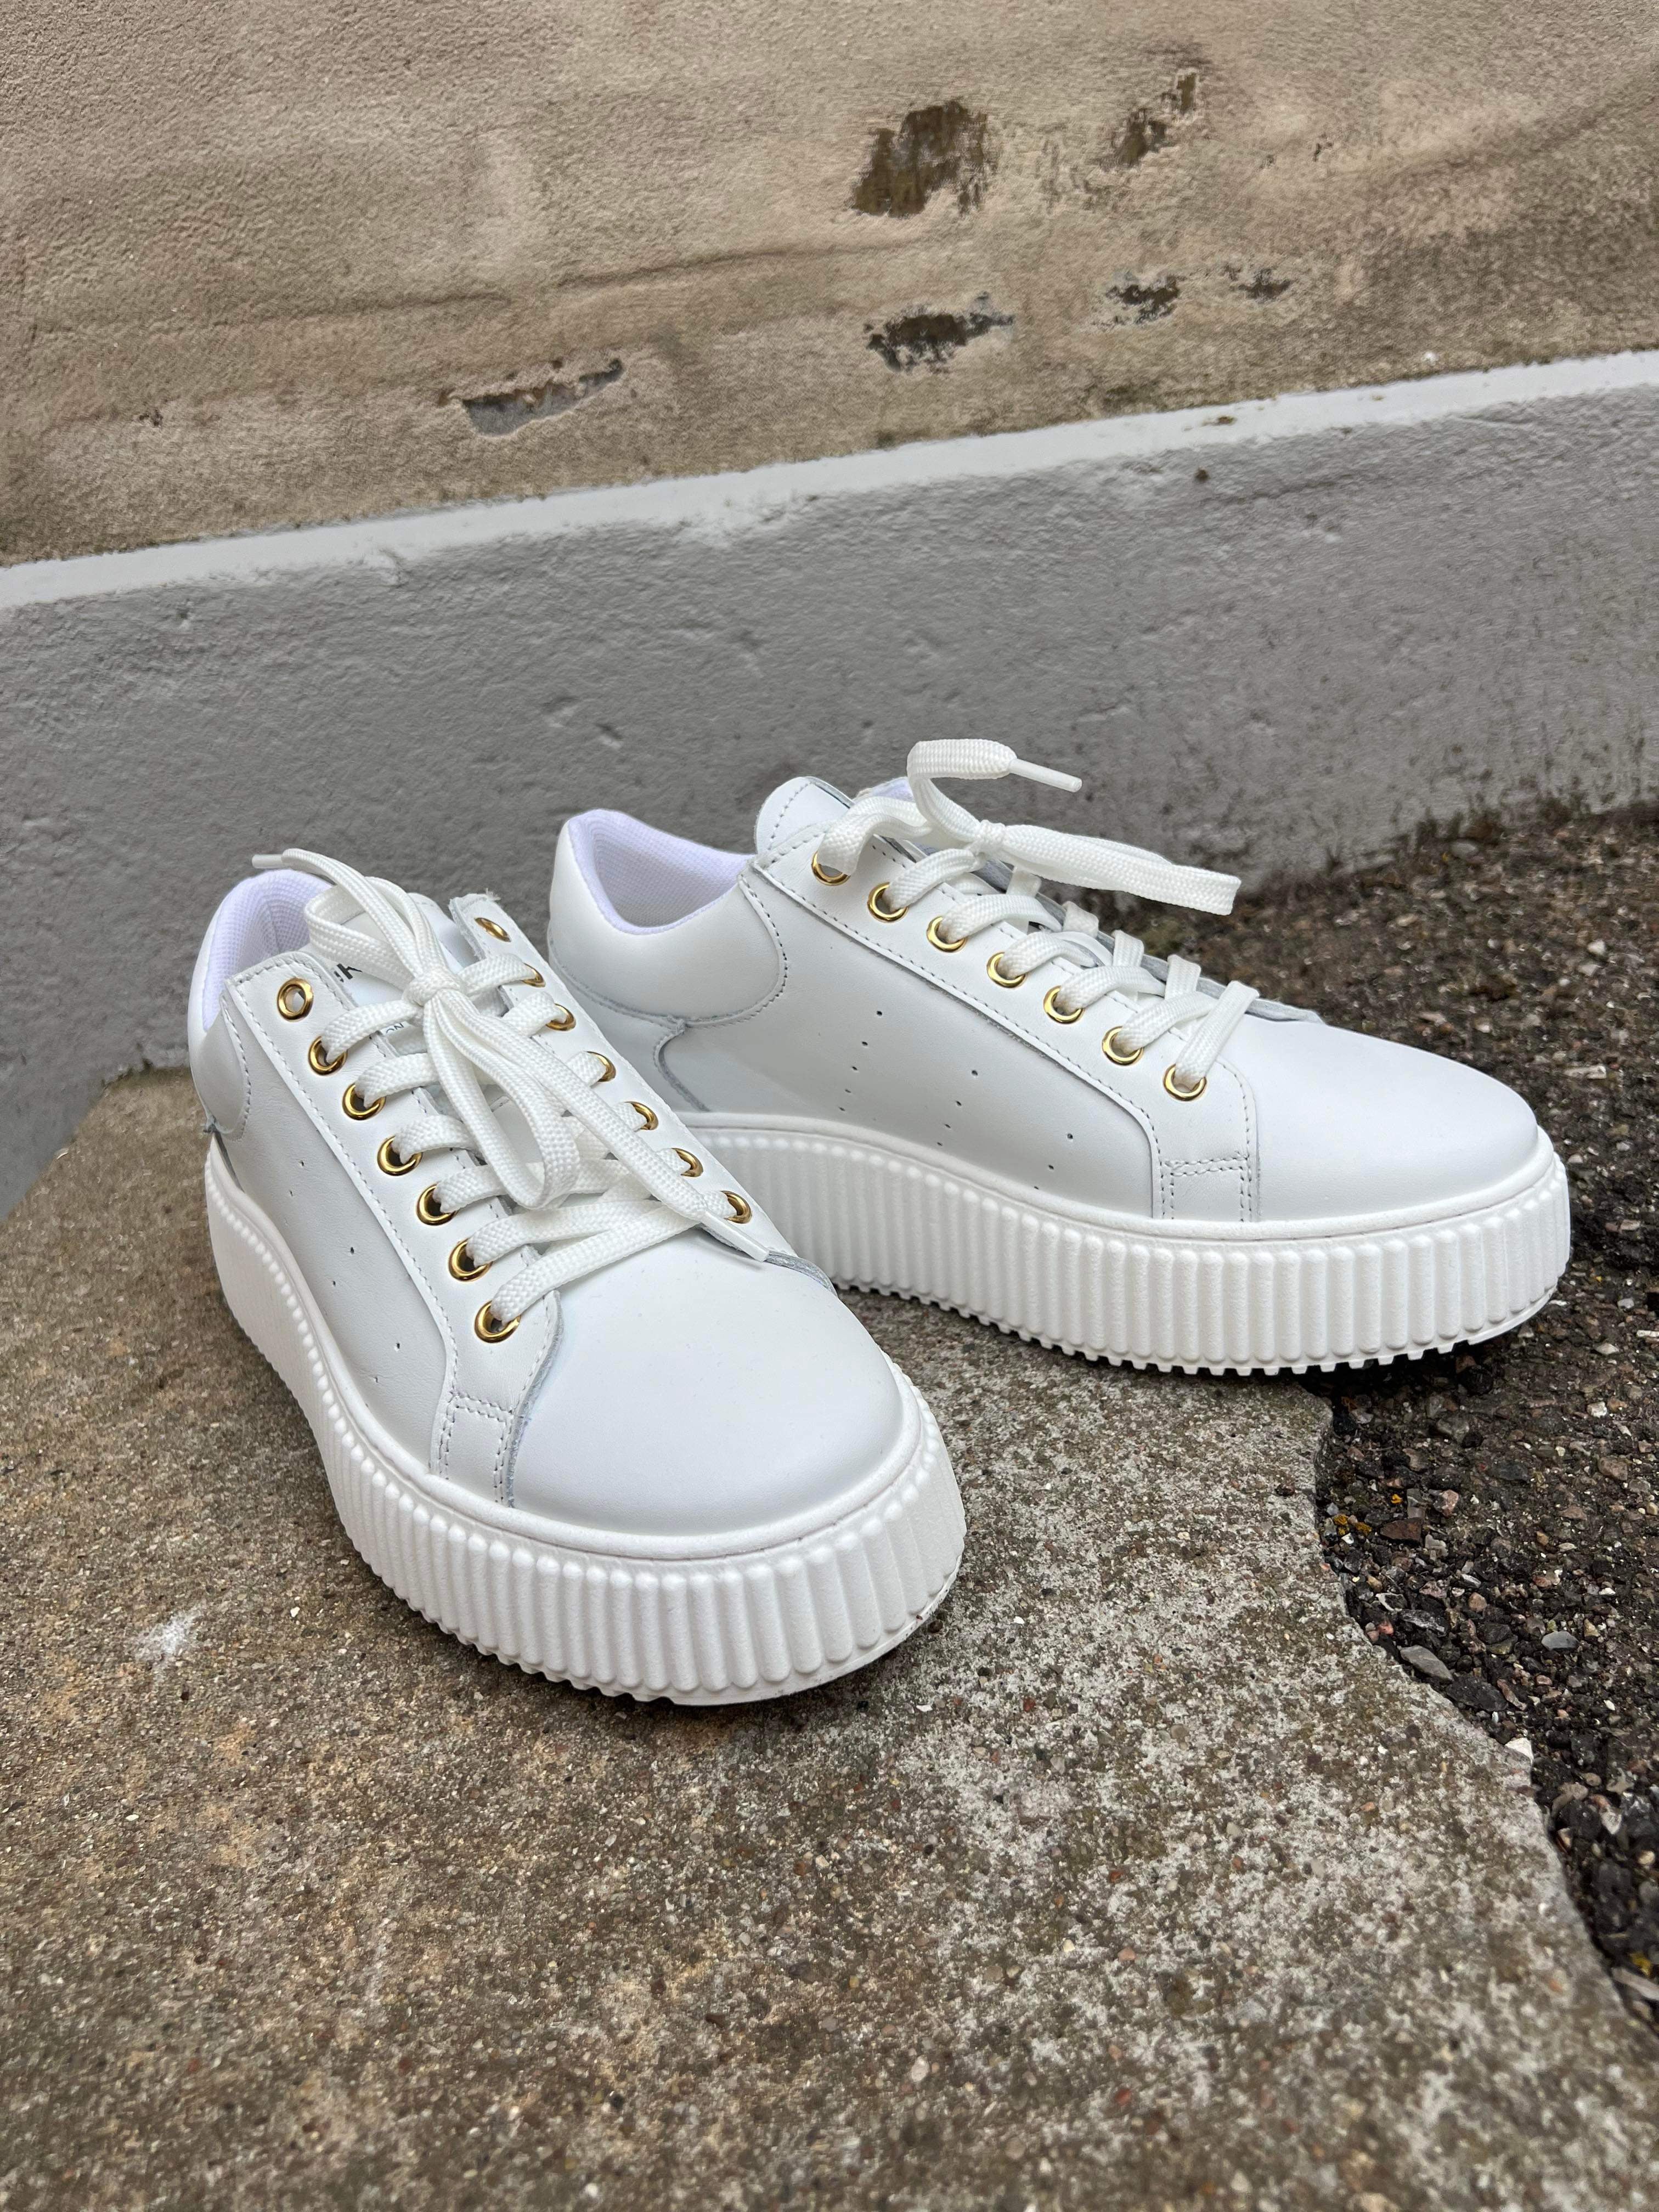 Court sneakers white